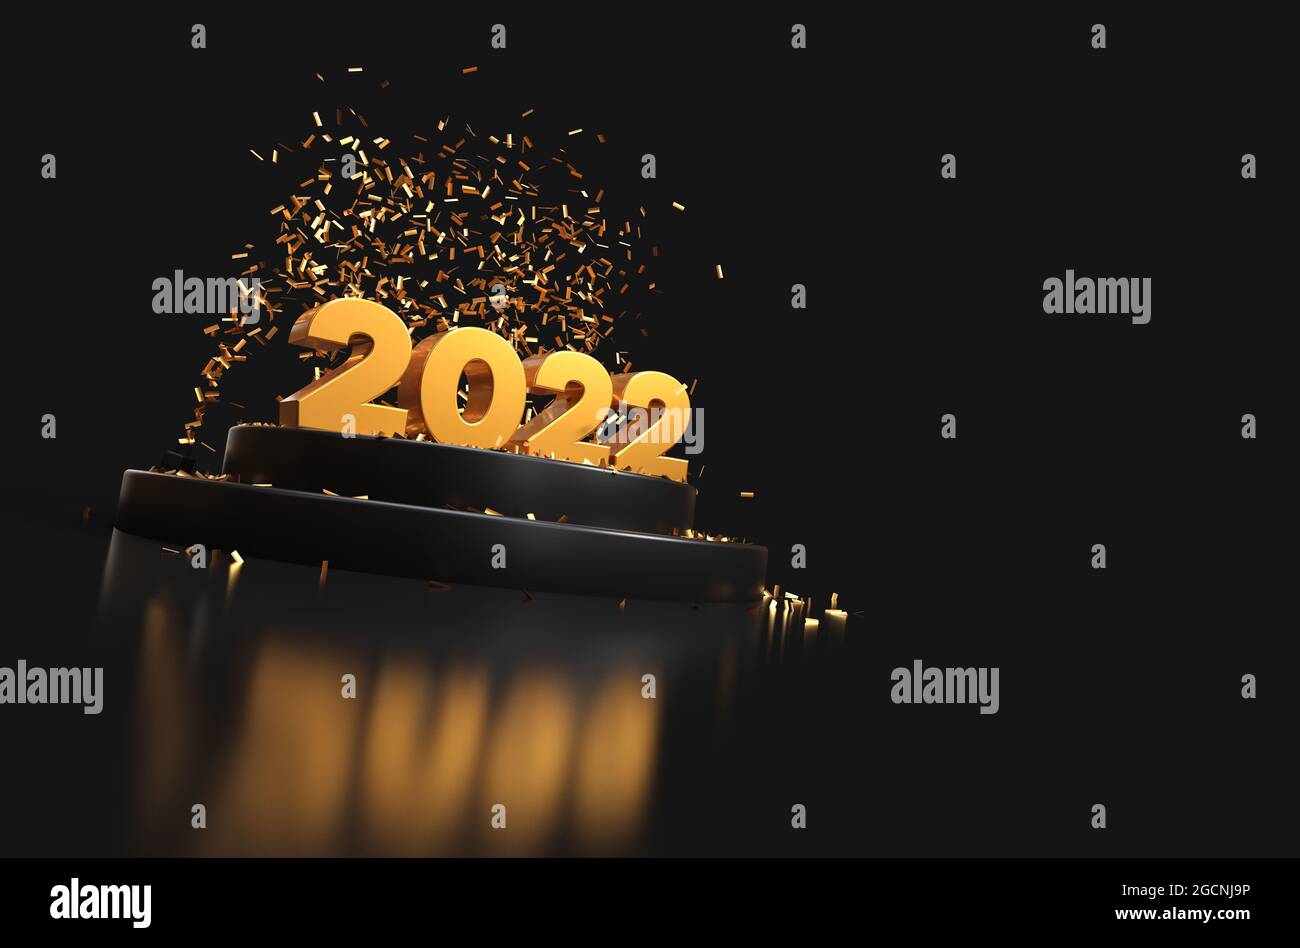 happy new year 2022 - 3D rendering - gold and black colors Stock Photo